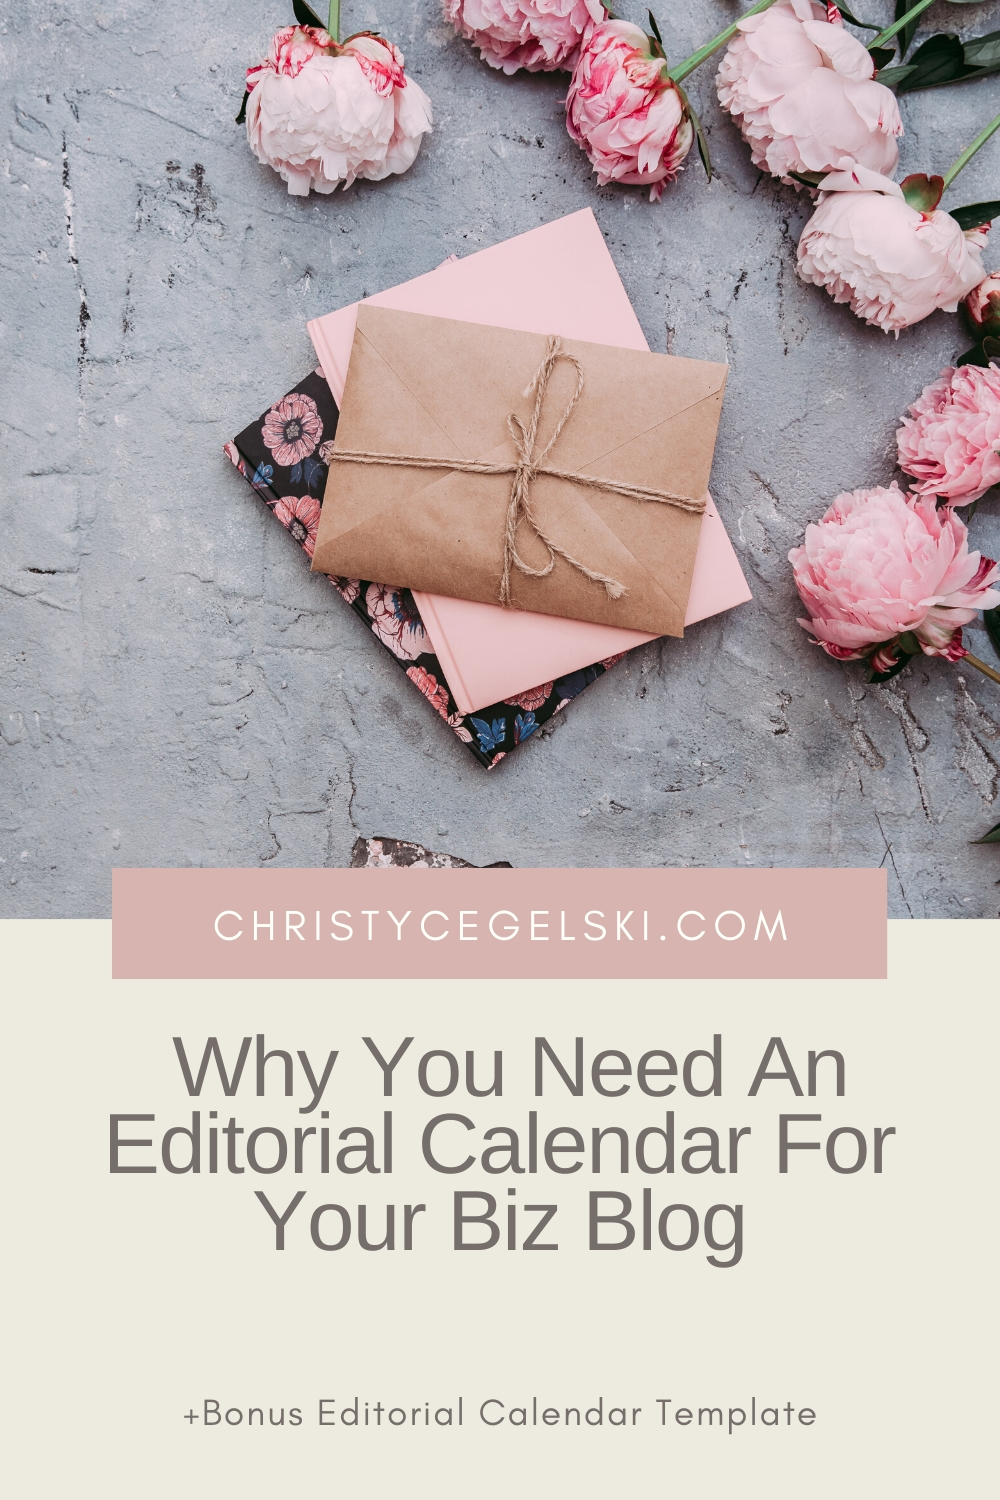 Why You Need An Editorial Calendar For Your Biz Blog